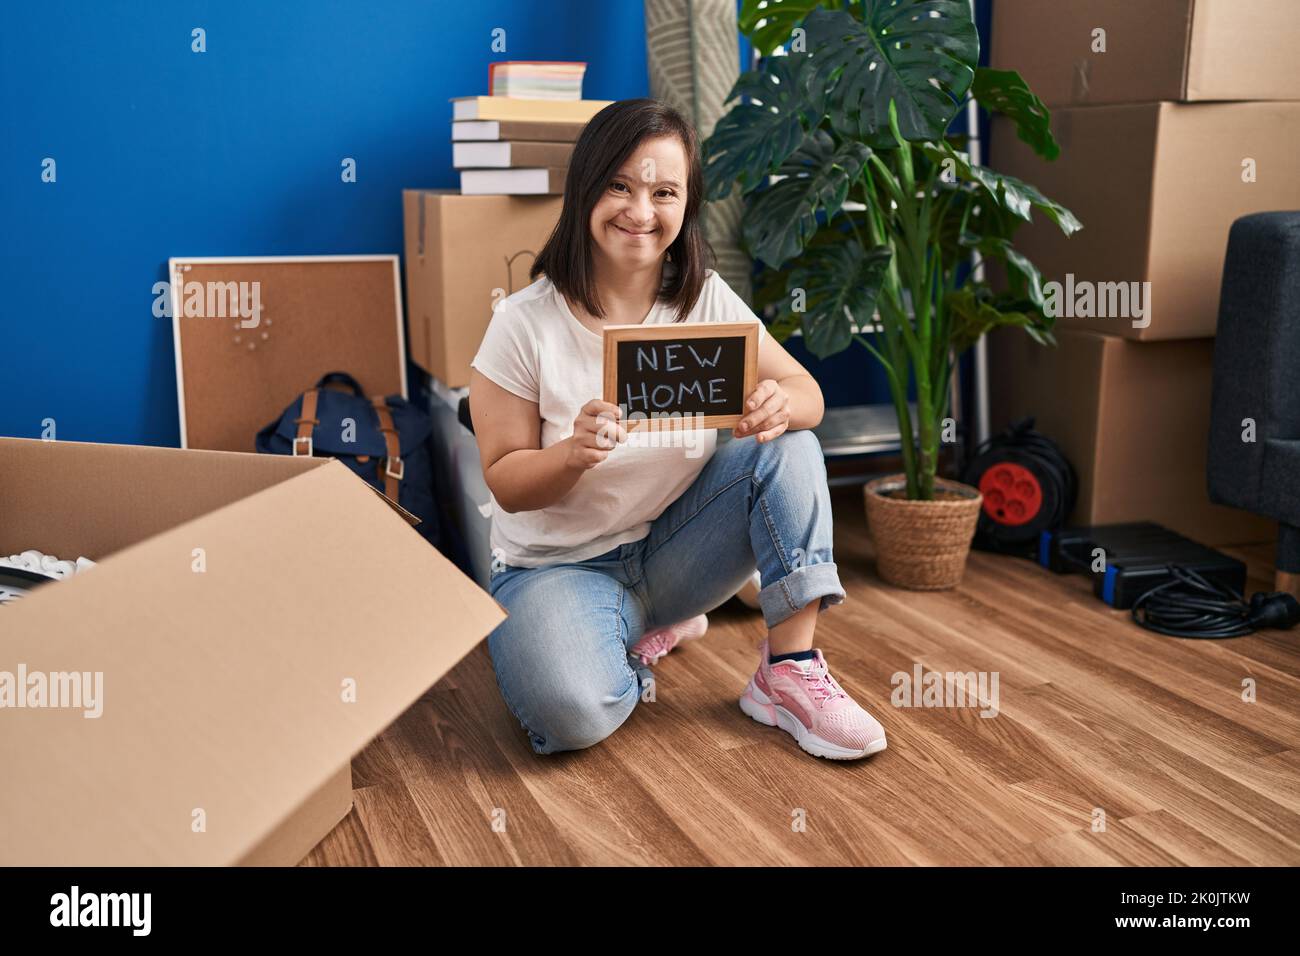 Hispanic girl with down syndrome sitting on the floor at new home celebrating crazy and amazed for success with open eyes screaming excited. Stock Photo